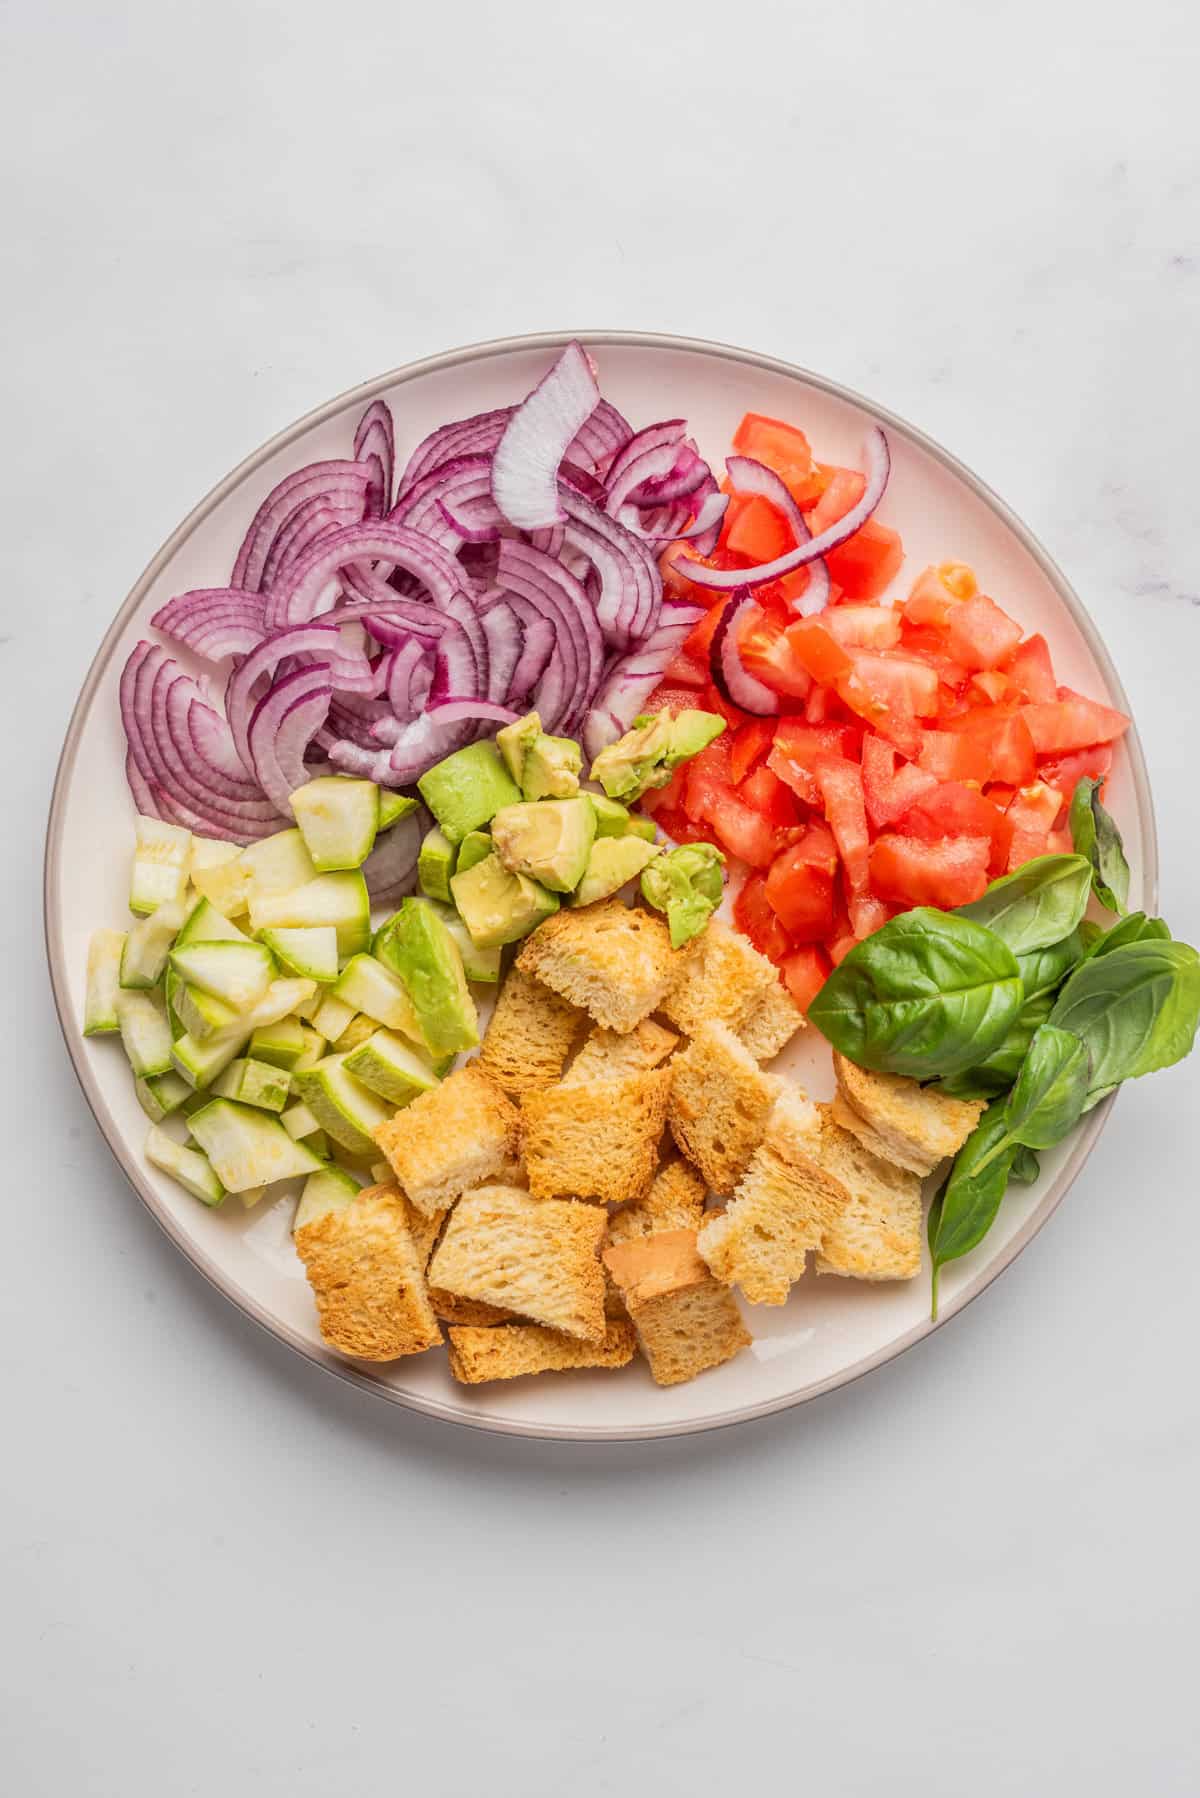 An overhead image of onions, tomatoes, avocadoes, crusty bread, zucchini, and fresh basil arranged side by side on a plate, before mixing together.